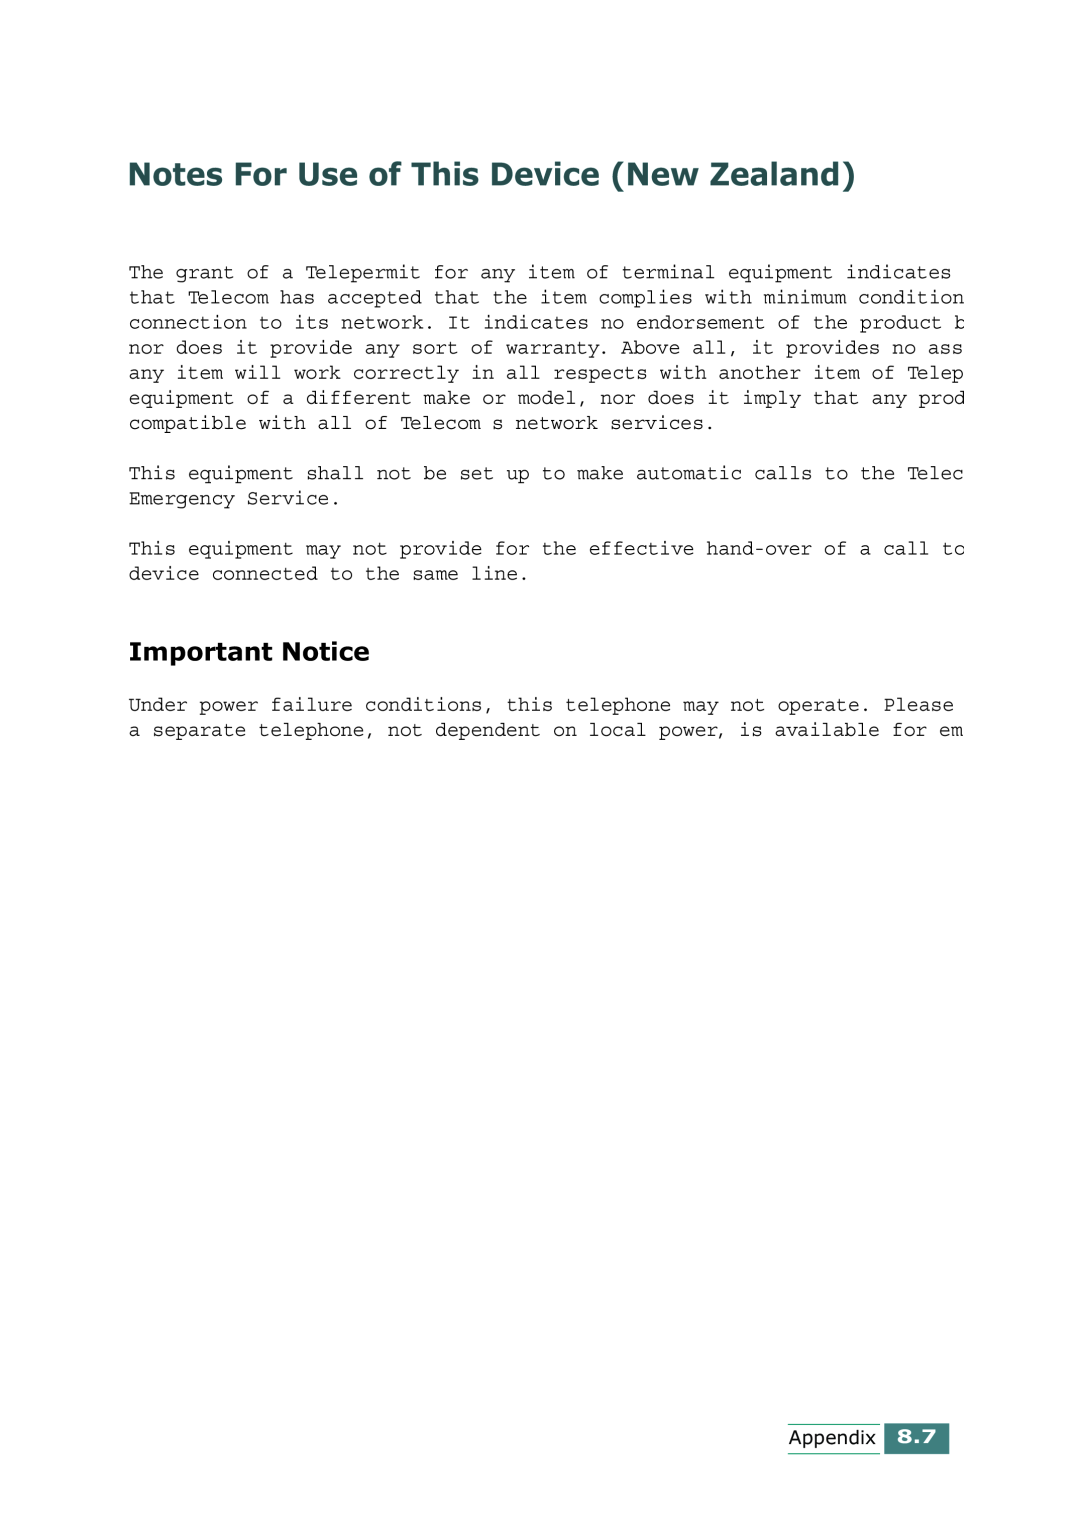 Samsung SCX-1100 manual Notes For Use of This Device New Zealand, Important Notice 